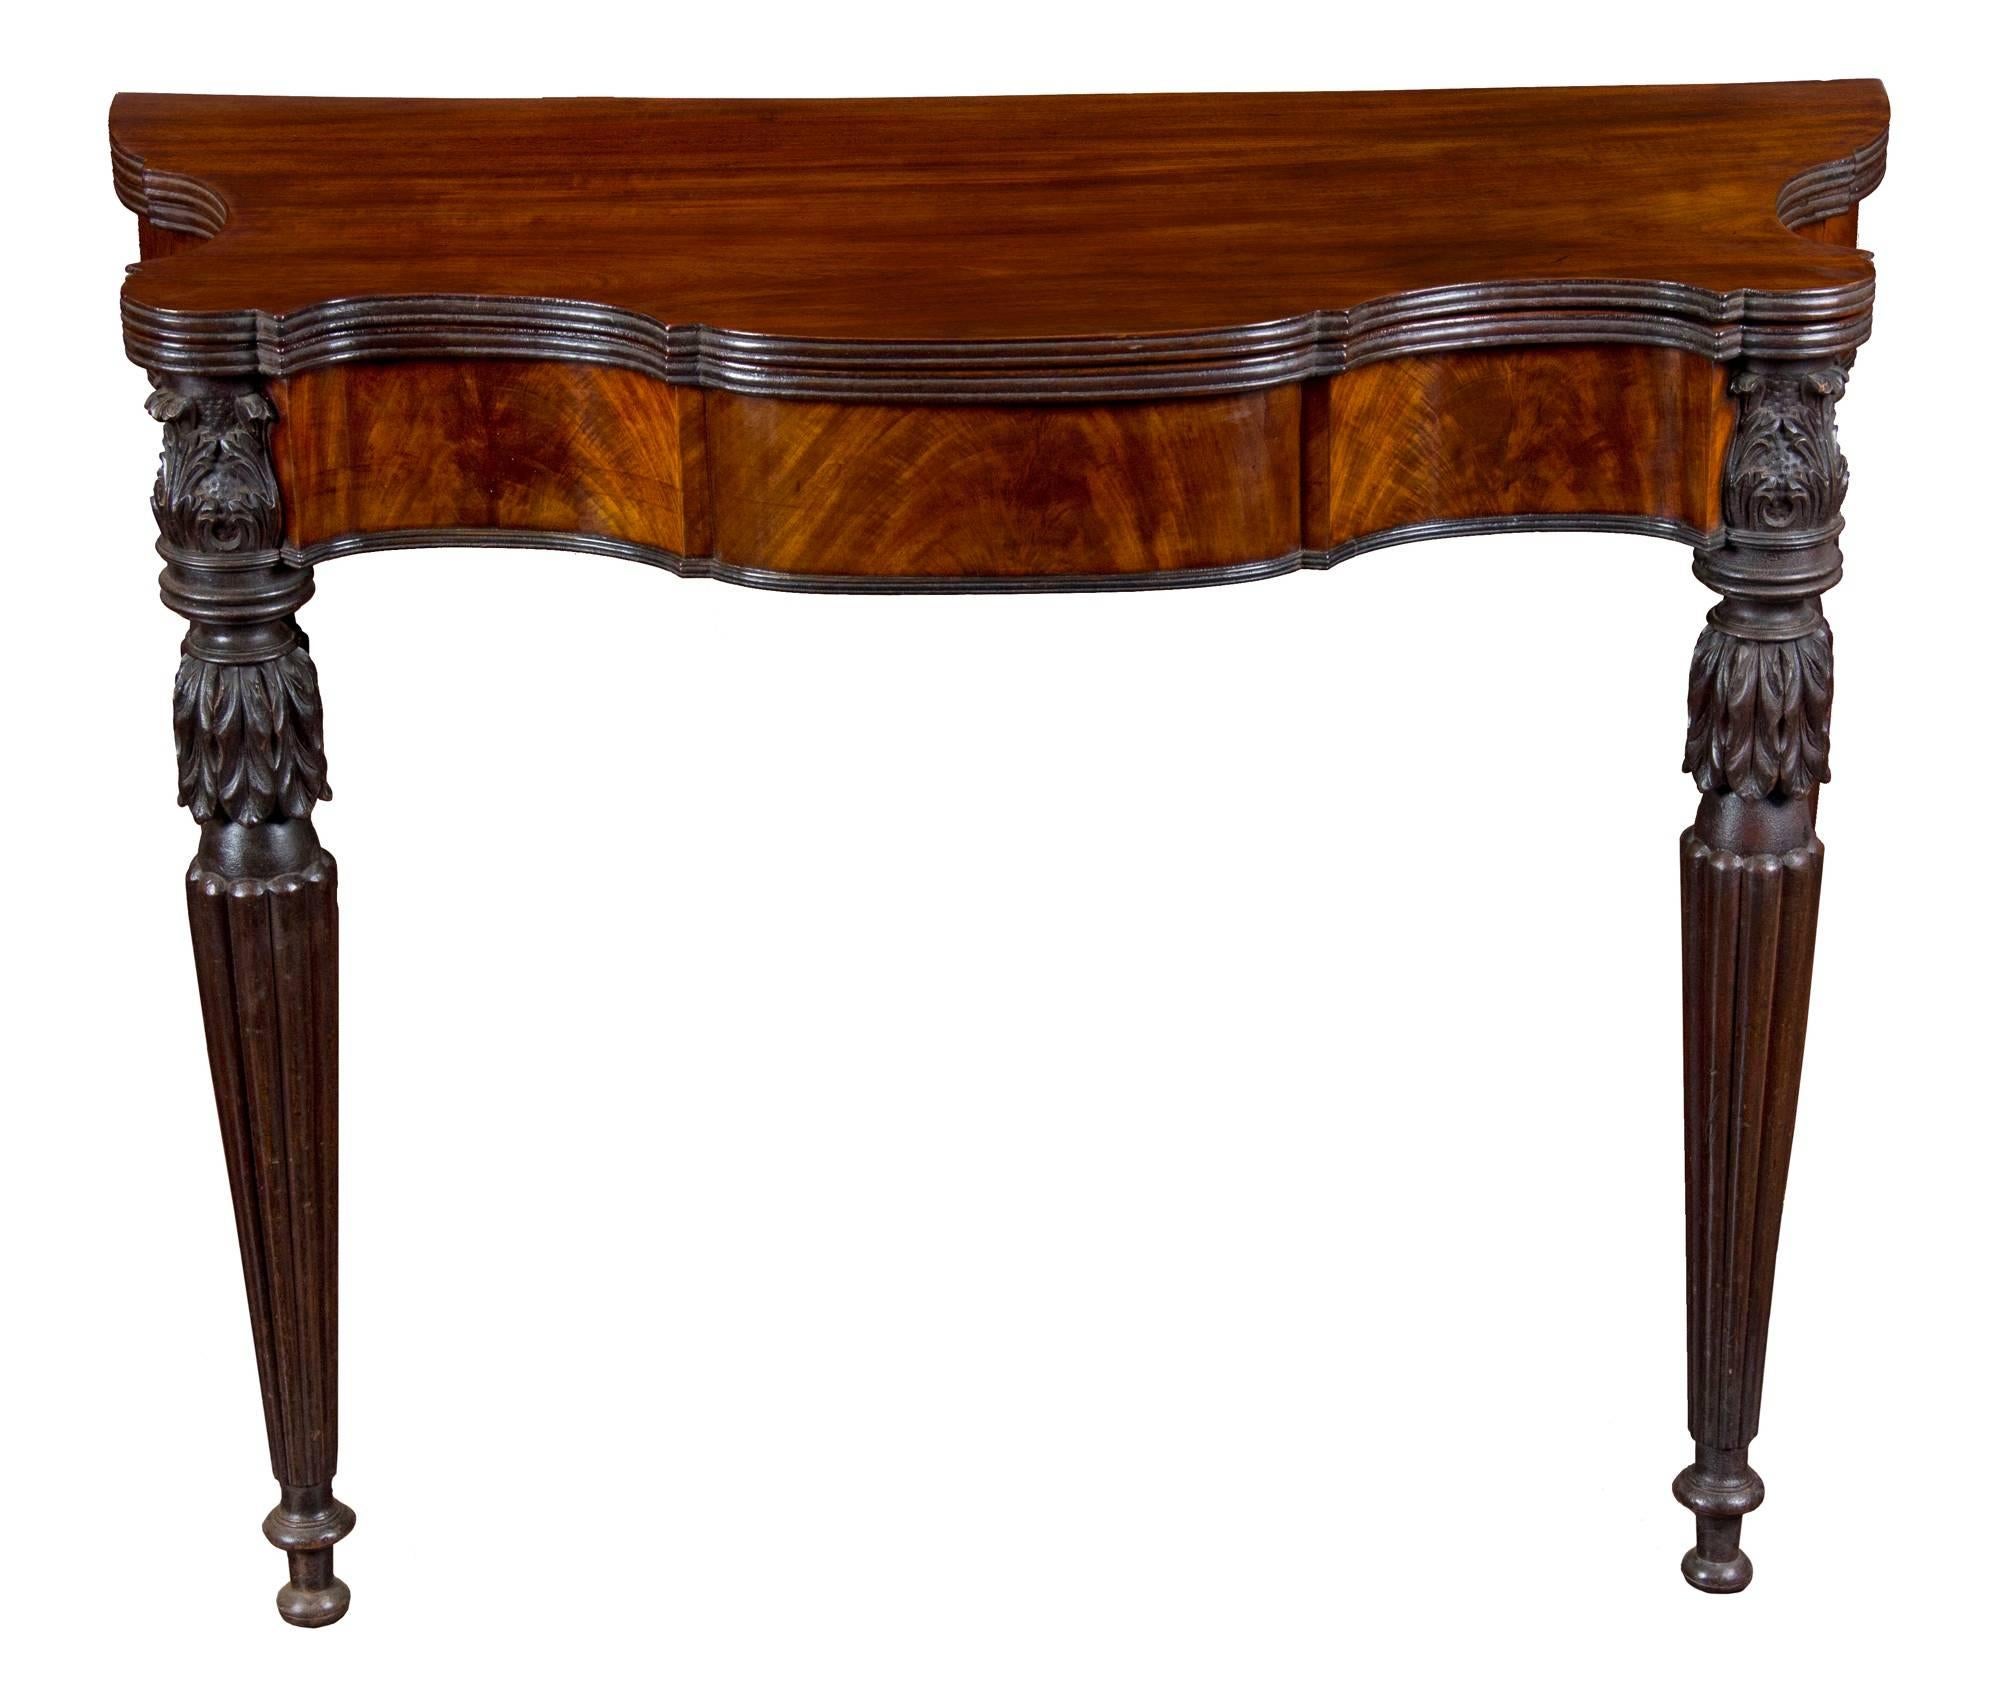 This is an outstanding Sheraton card table with an extenuated shaped top in immaculate, most desirable condition. This model is extremely successful because of the gracious serpentine swing to the front apron creating an image reminiscent of the